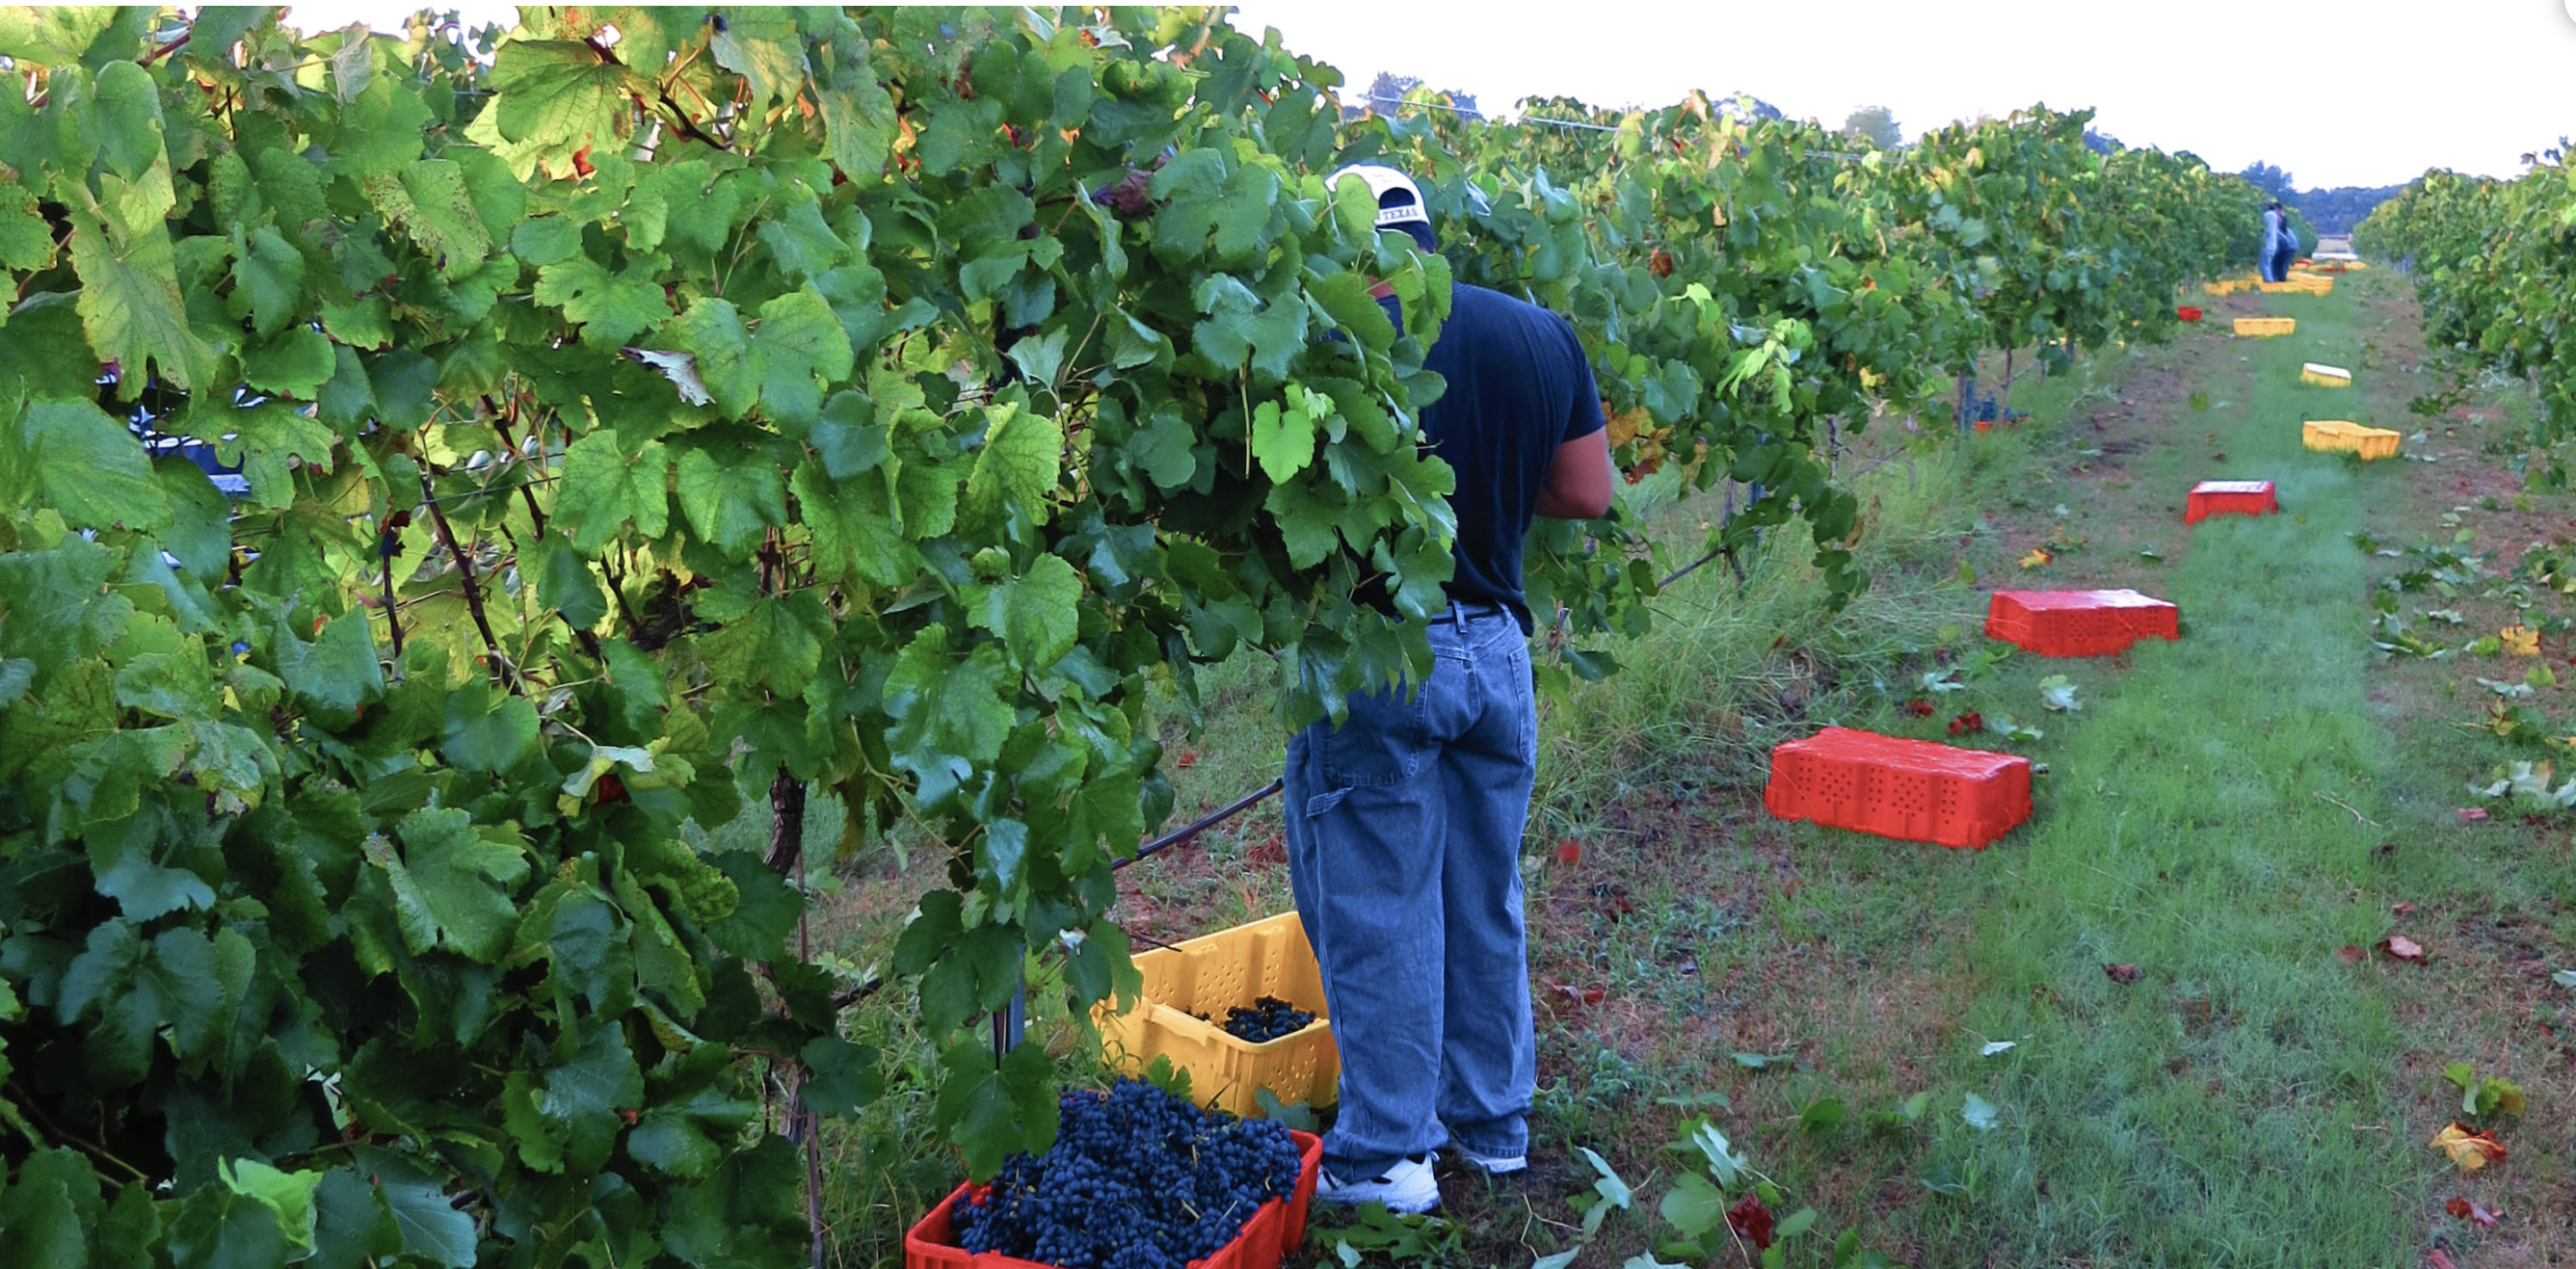 A man is harvesting grapes.